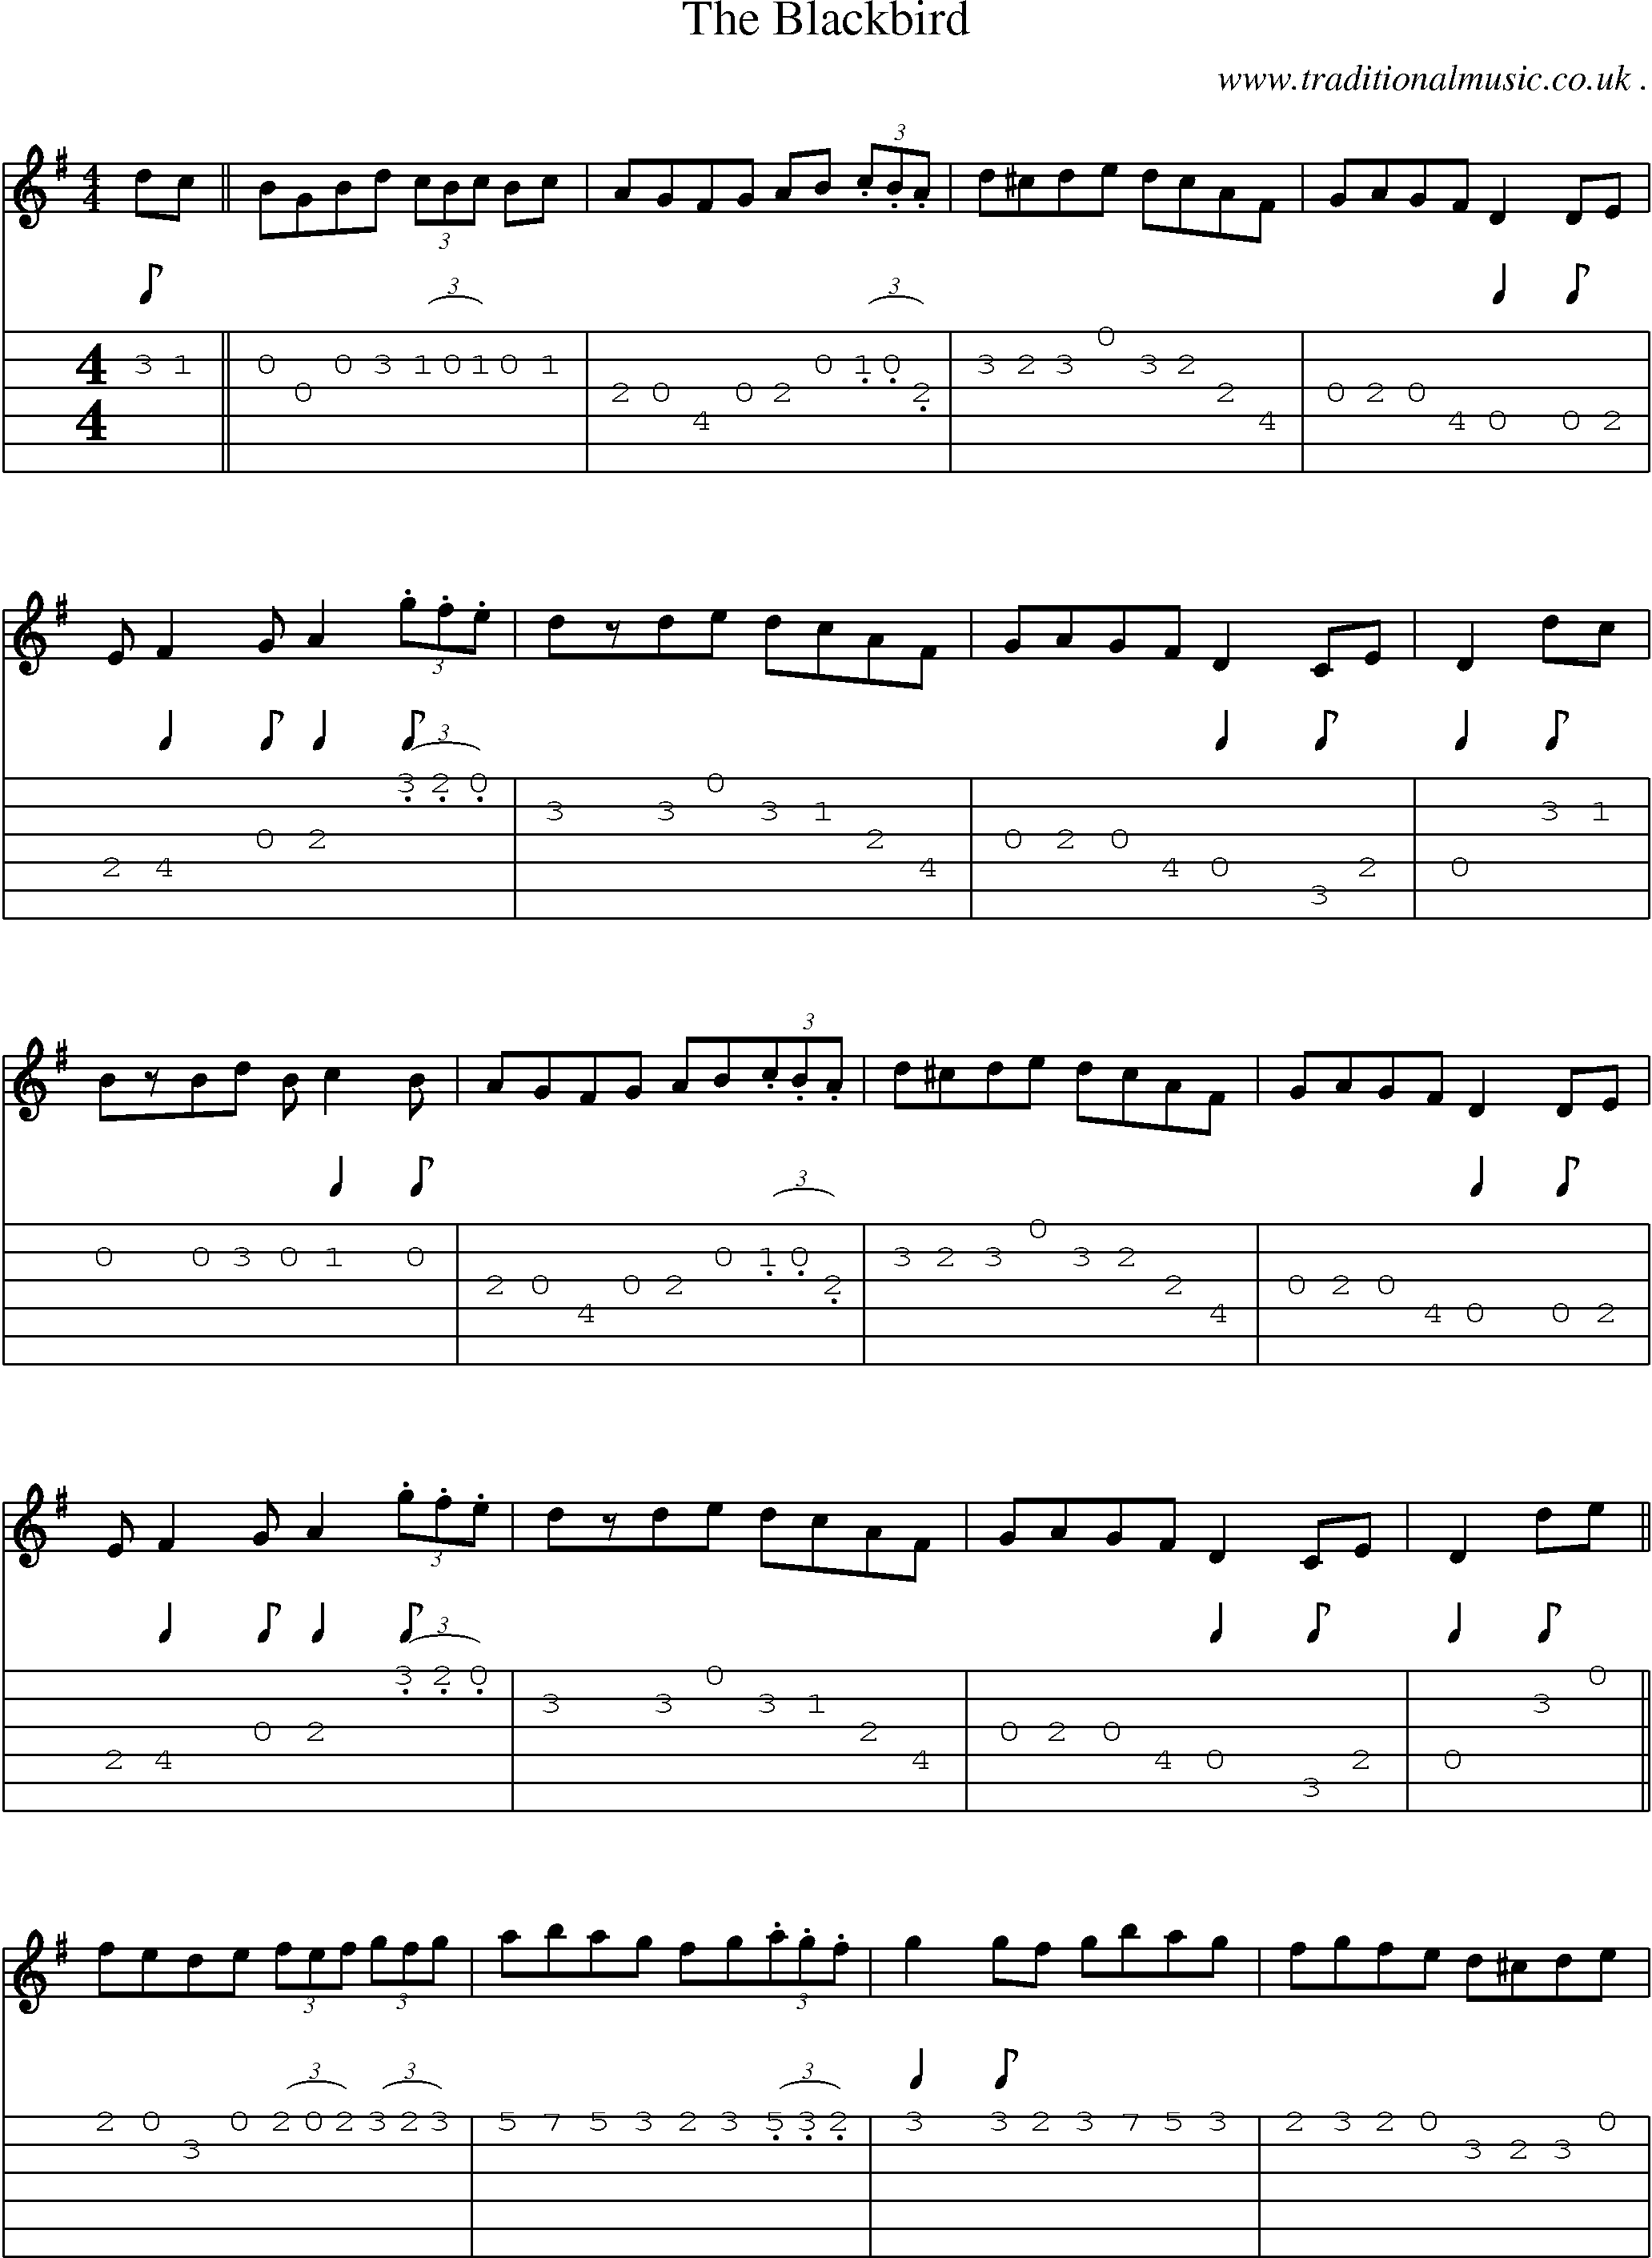 Sheet-Music and Guitar Tabs for The Blackbird